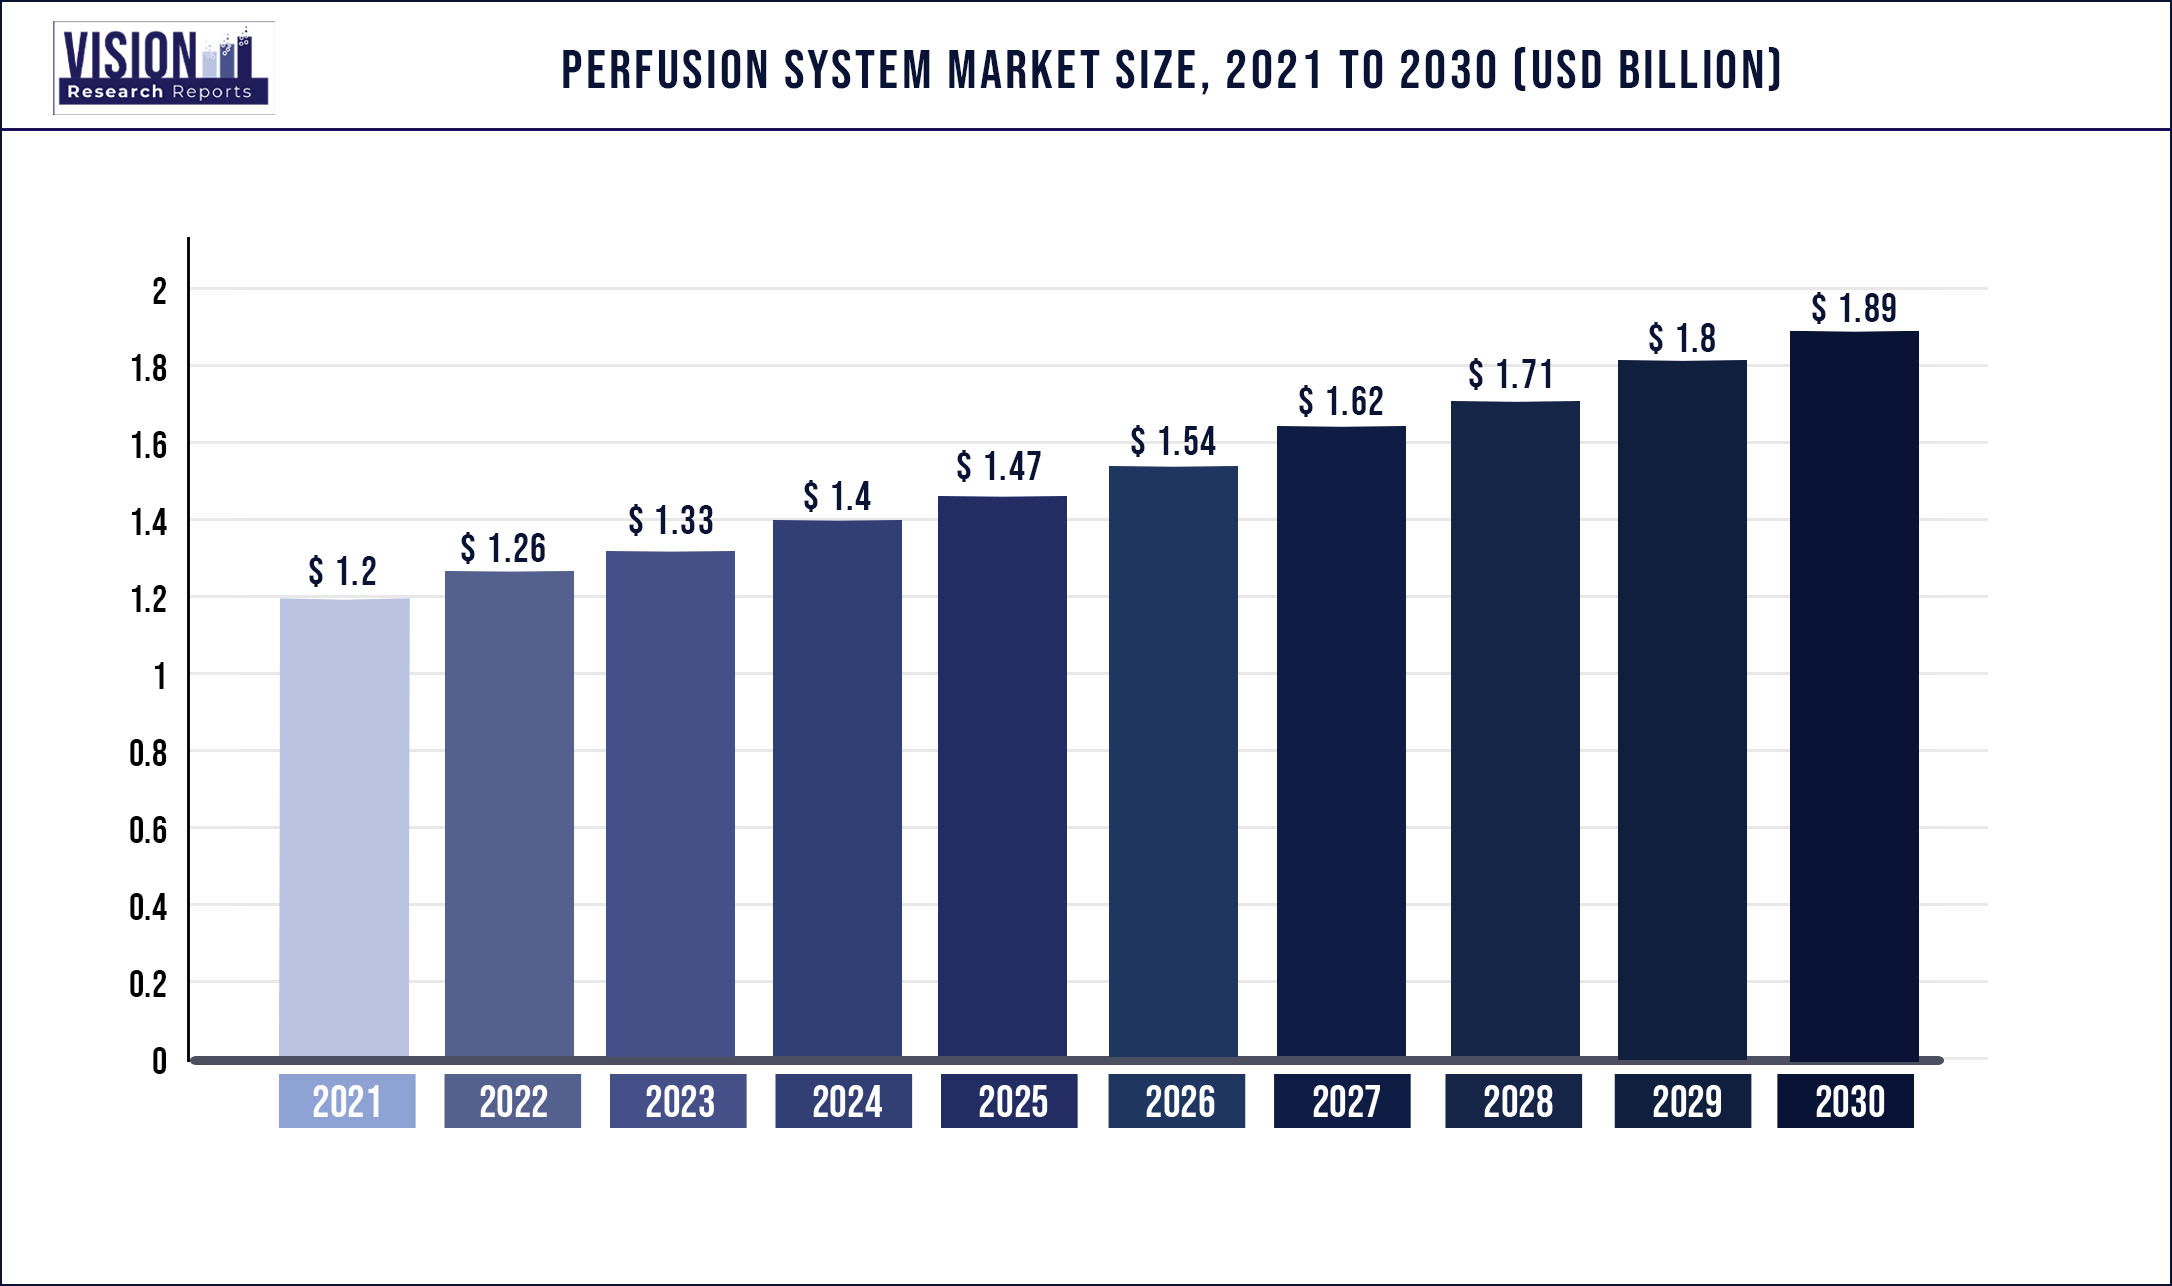 Perfusion System Market Size 2021 to 2030